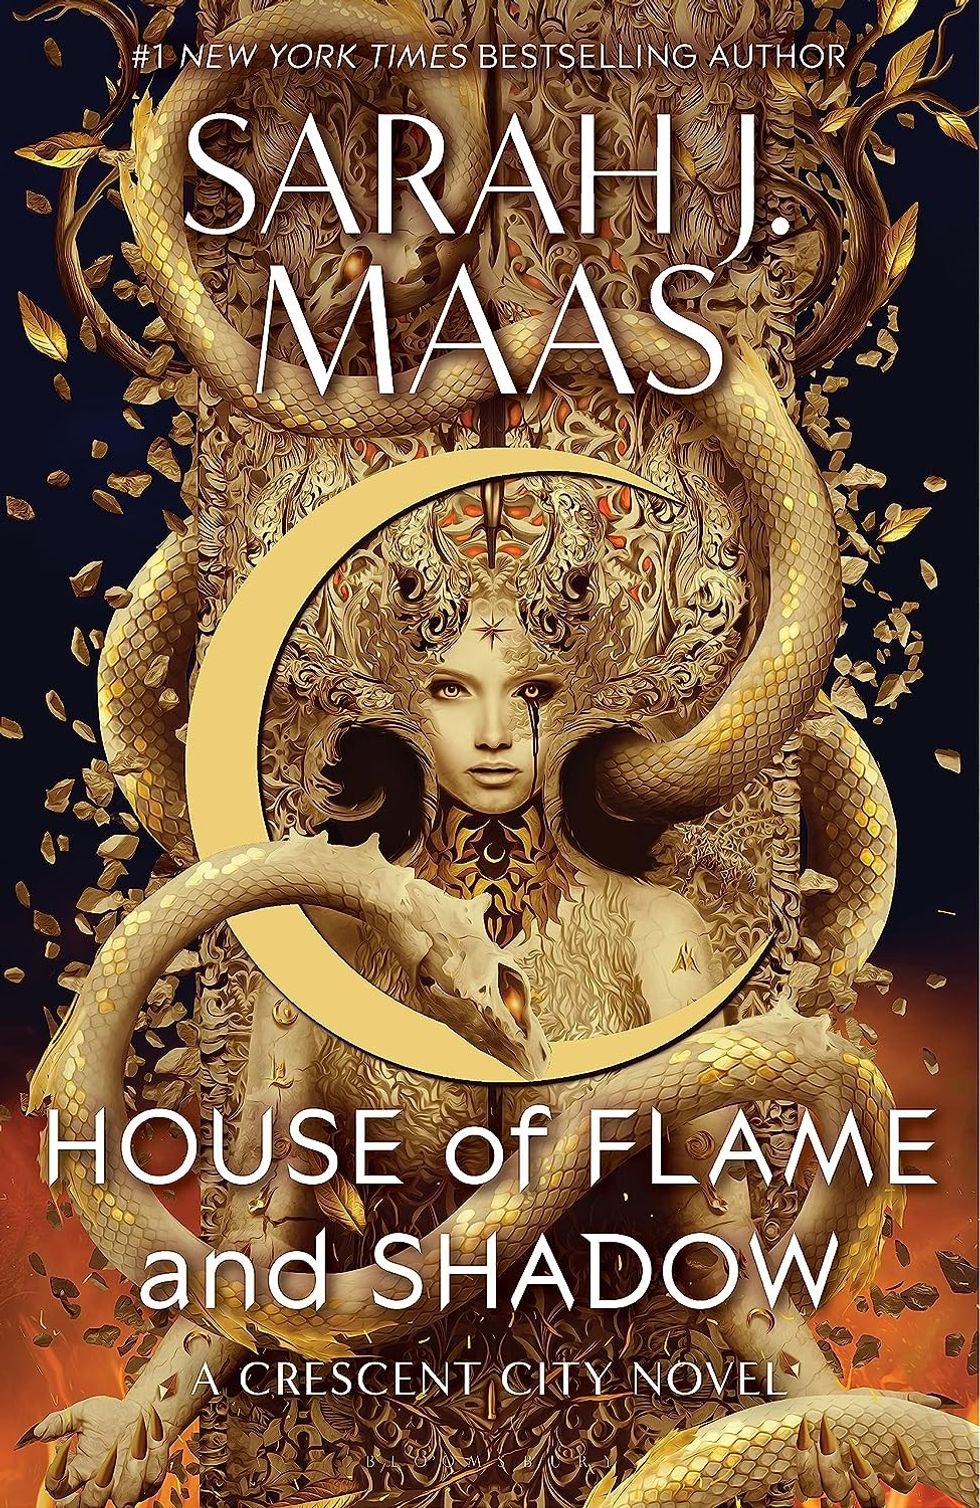 House of Flame and Shadow by Sarah J Maas